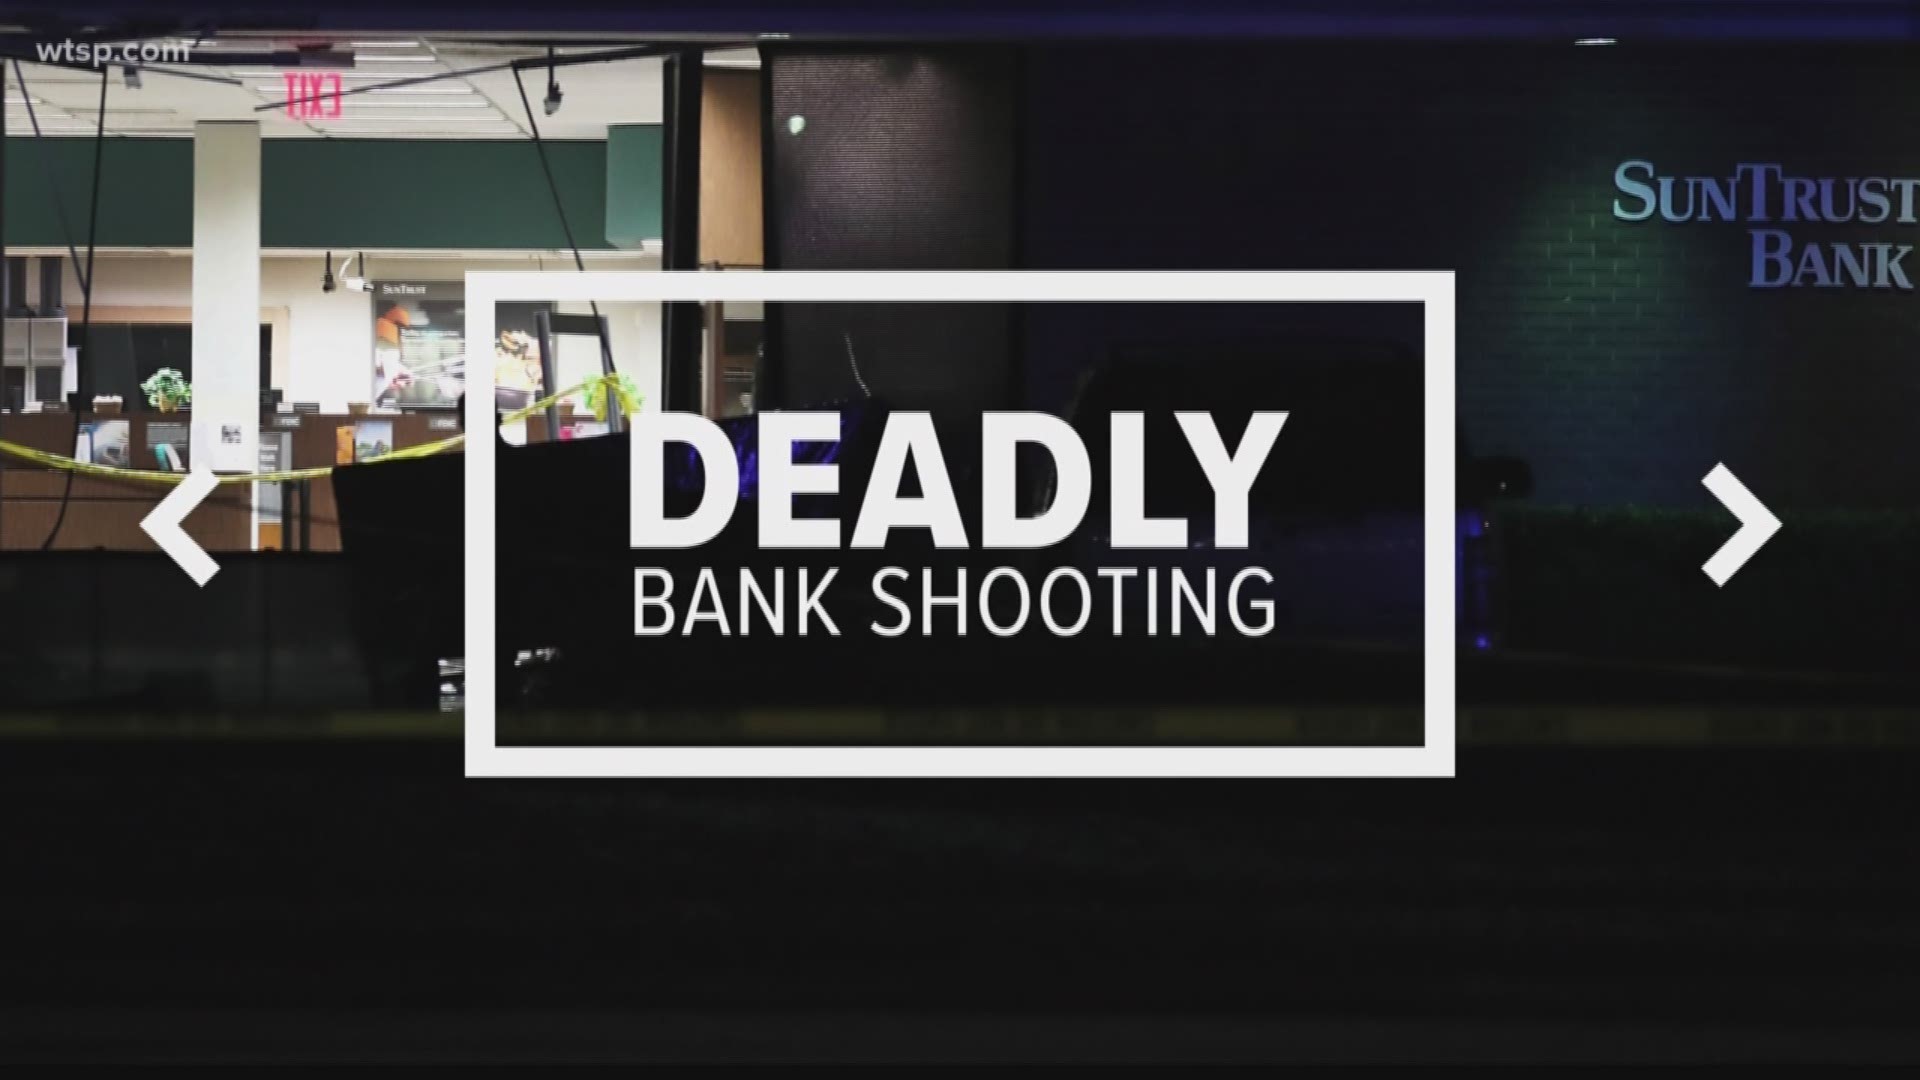 Debra Cook was one of four bank employees who died in the shooting.